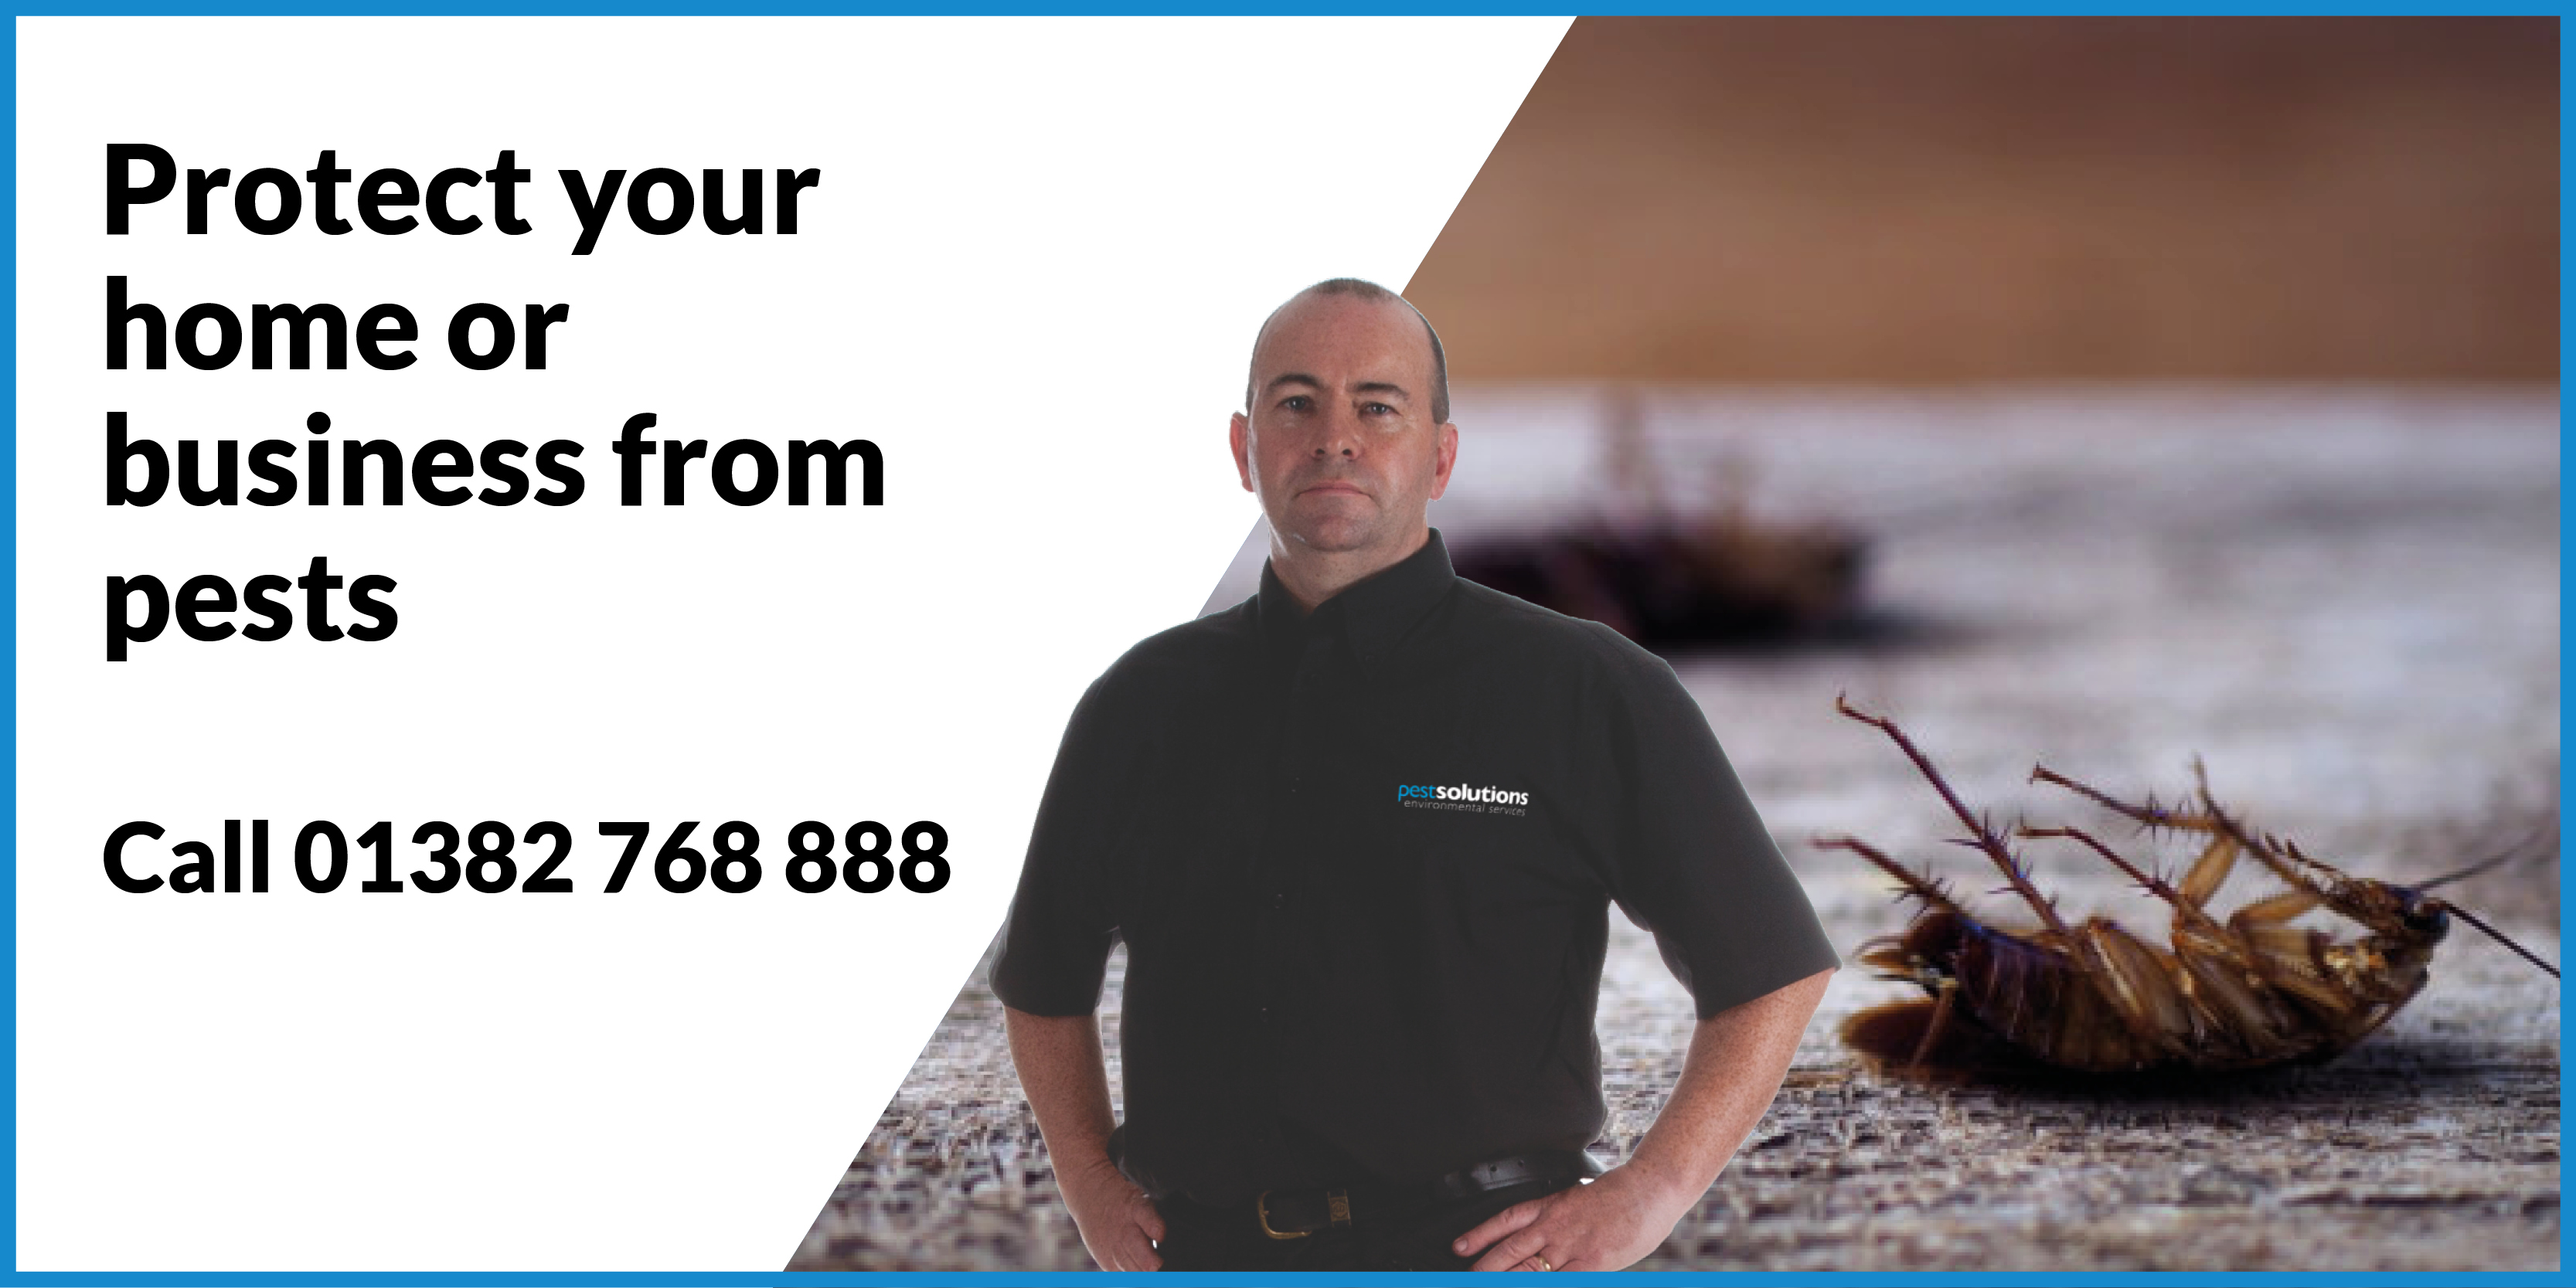 Pest Management Dundee Pest Solutions - Pest Solutions